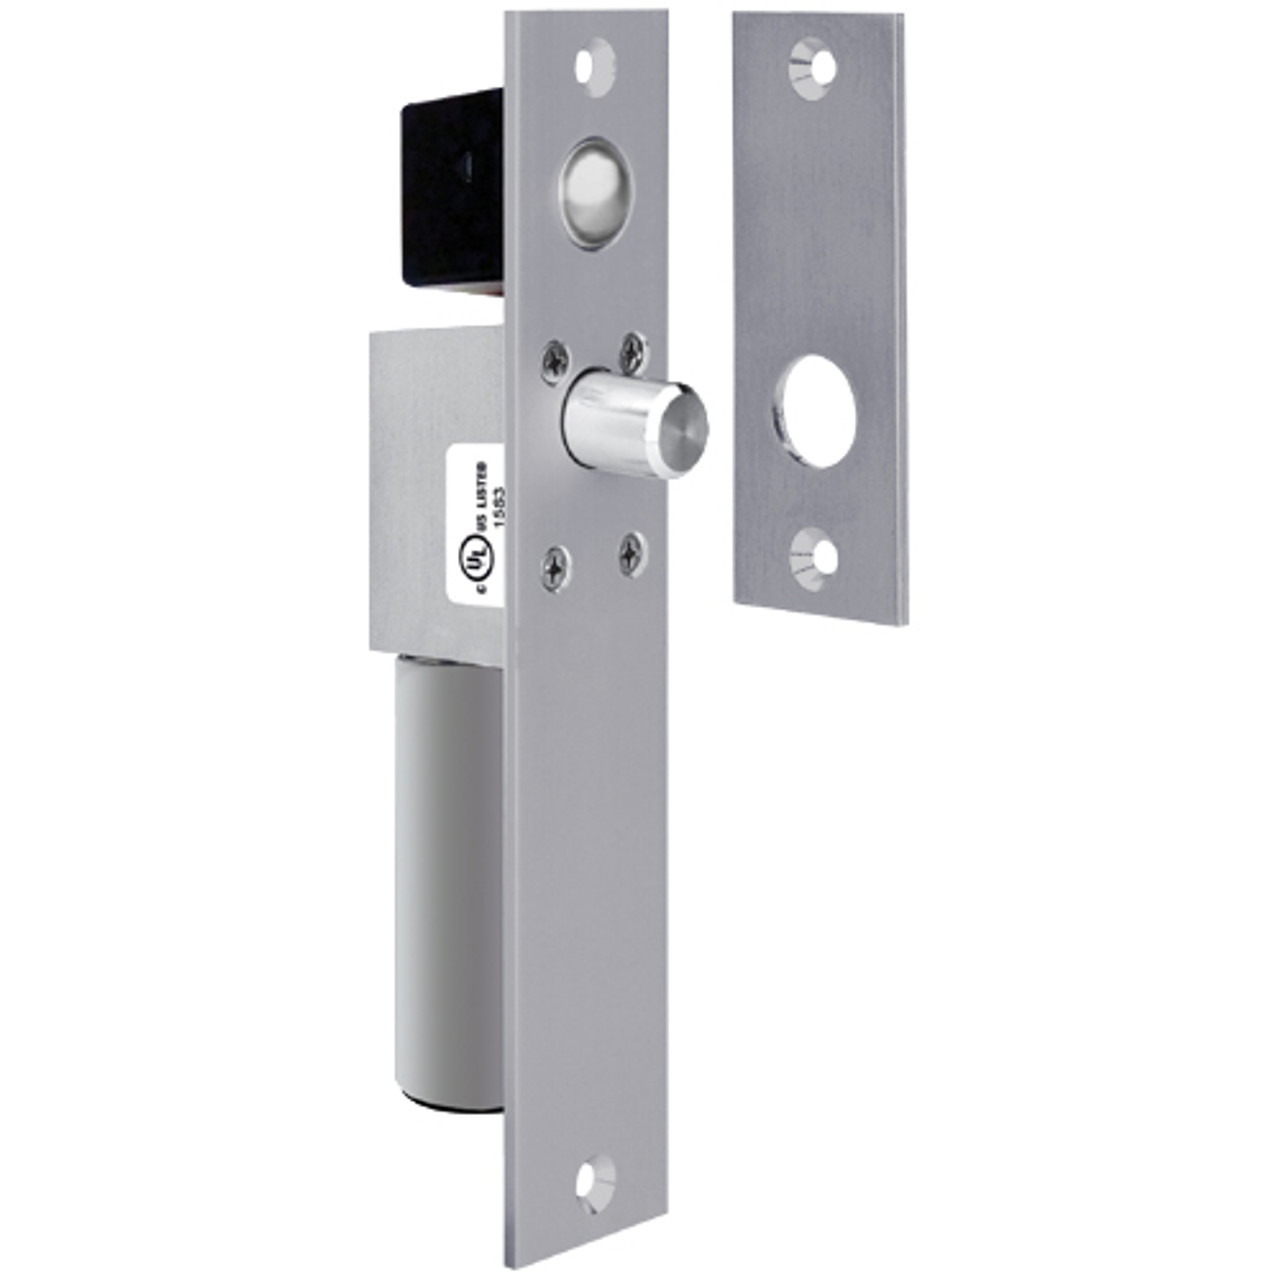 1091AIQB SDC FailSafe Spacesaver Mortise Bolt Lock with Bolt Position Sensor in Dull Chrome